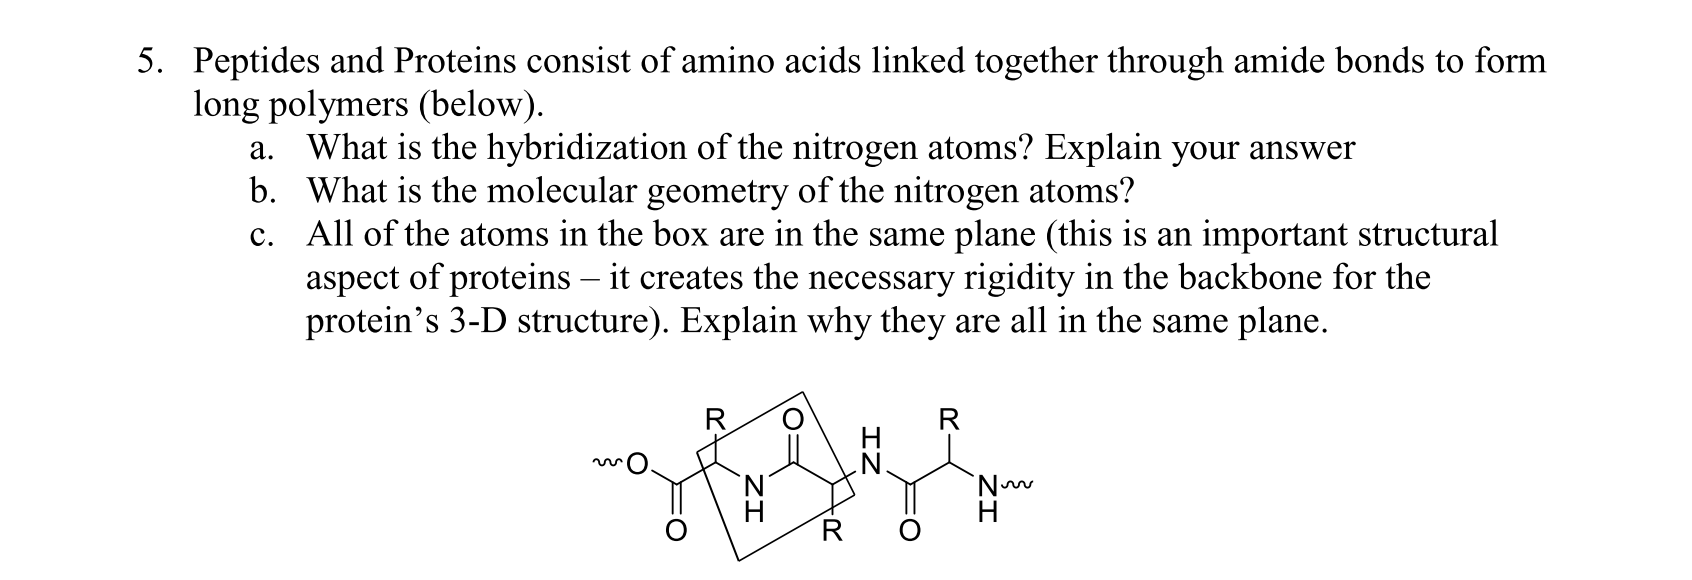 5. Peptides and Proteins consist of amino acids linked together through amide bonds to form
long polymers (below).
a. What is the hybridization of the nitrogen atoms? Explain your answer
b. What is the molecular geometry of the nitrogen atoms?
c. All of the atoms in the box are in the same plane (this is an important structural
aspect of proteins – it creates the necessary rigidity in the backbone for the
protein's 3-D structure). Explain why they are all in the same plane.
R
H
